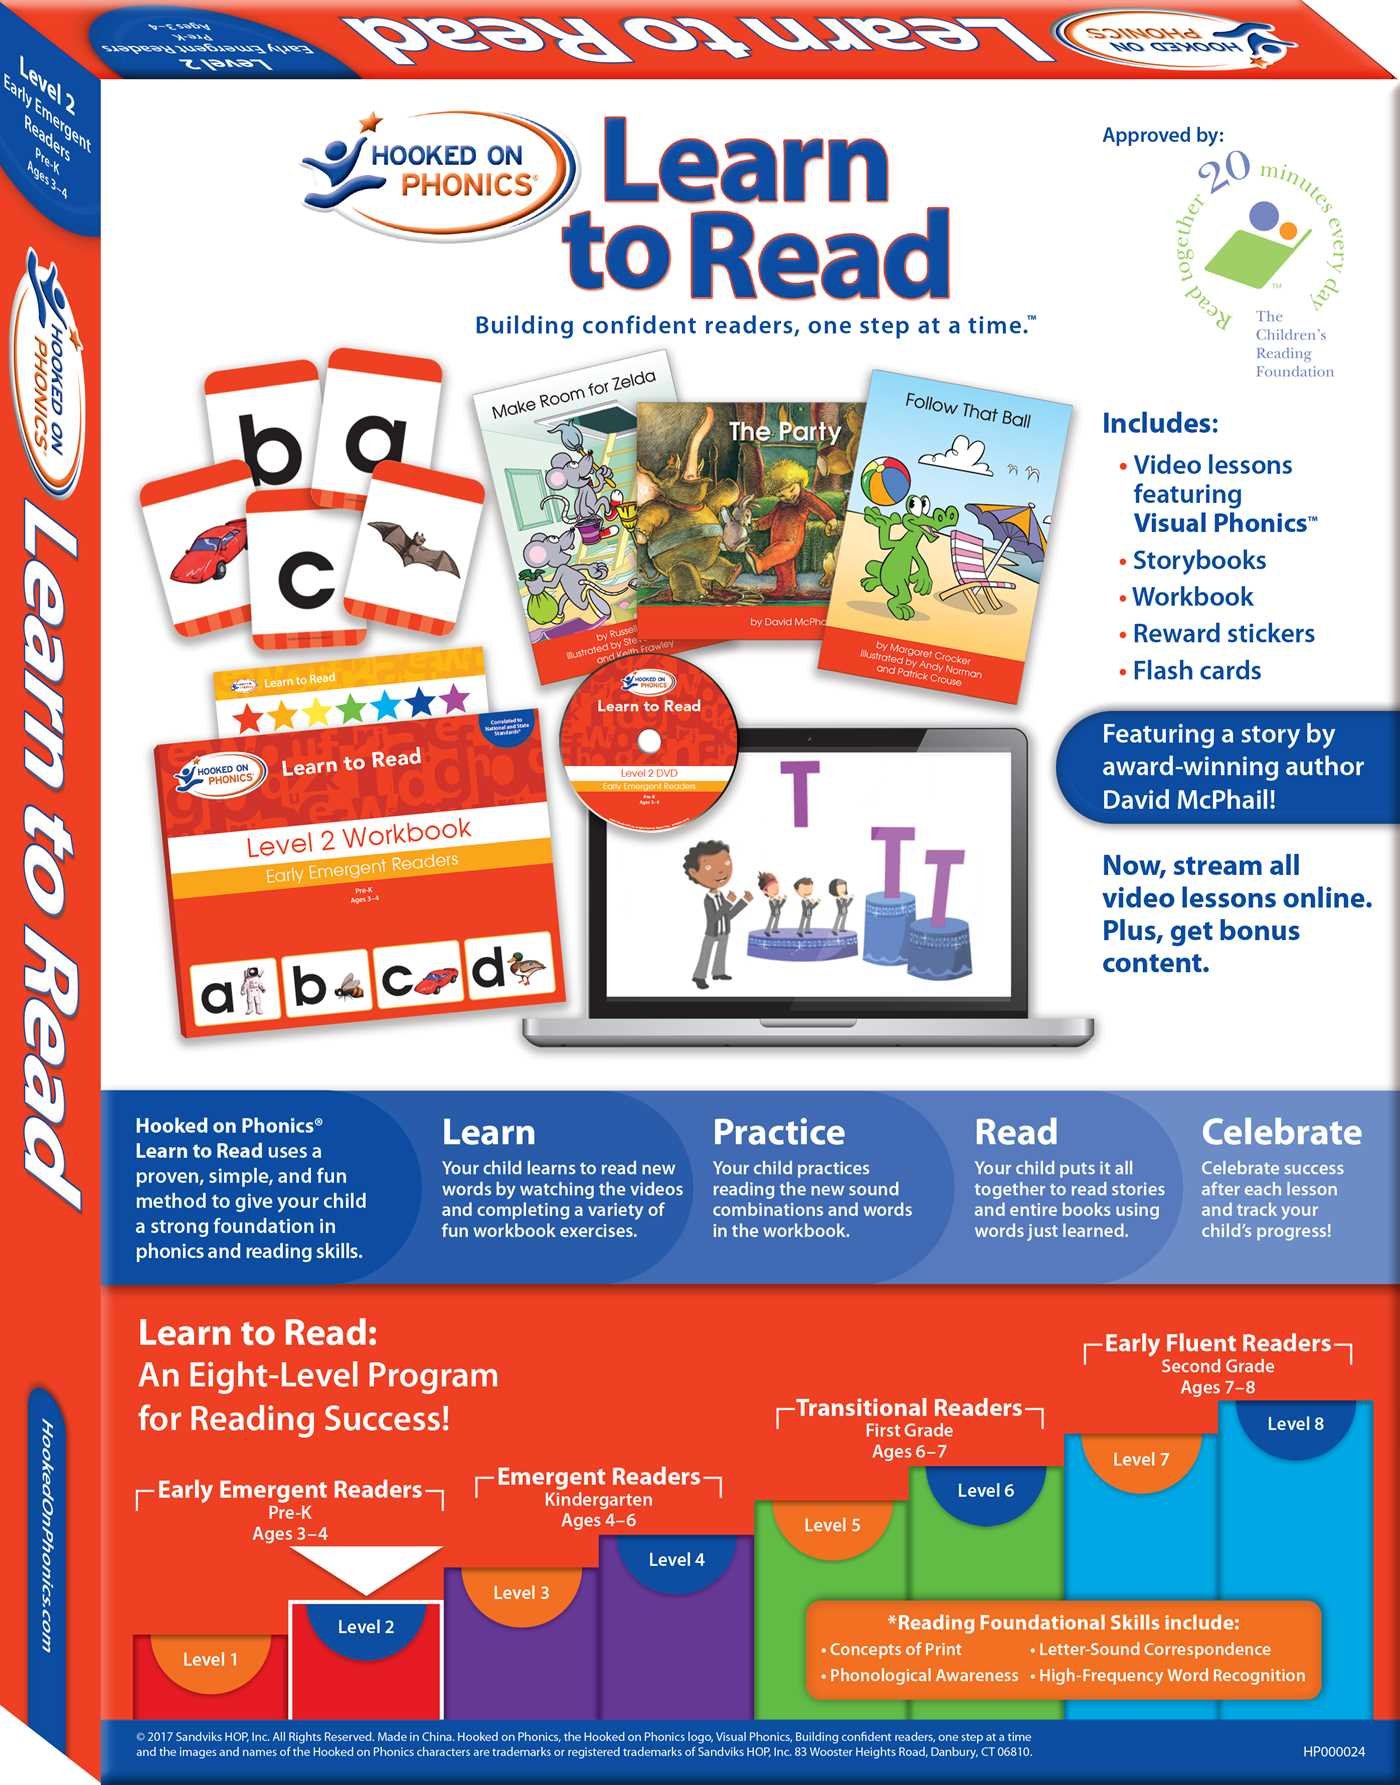 Hooked on Phonics Learn to Read - Level 2: Early Emergent Readers (Pre-K | Ages 3-4) (2)